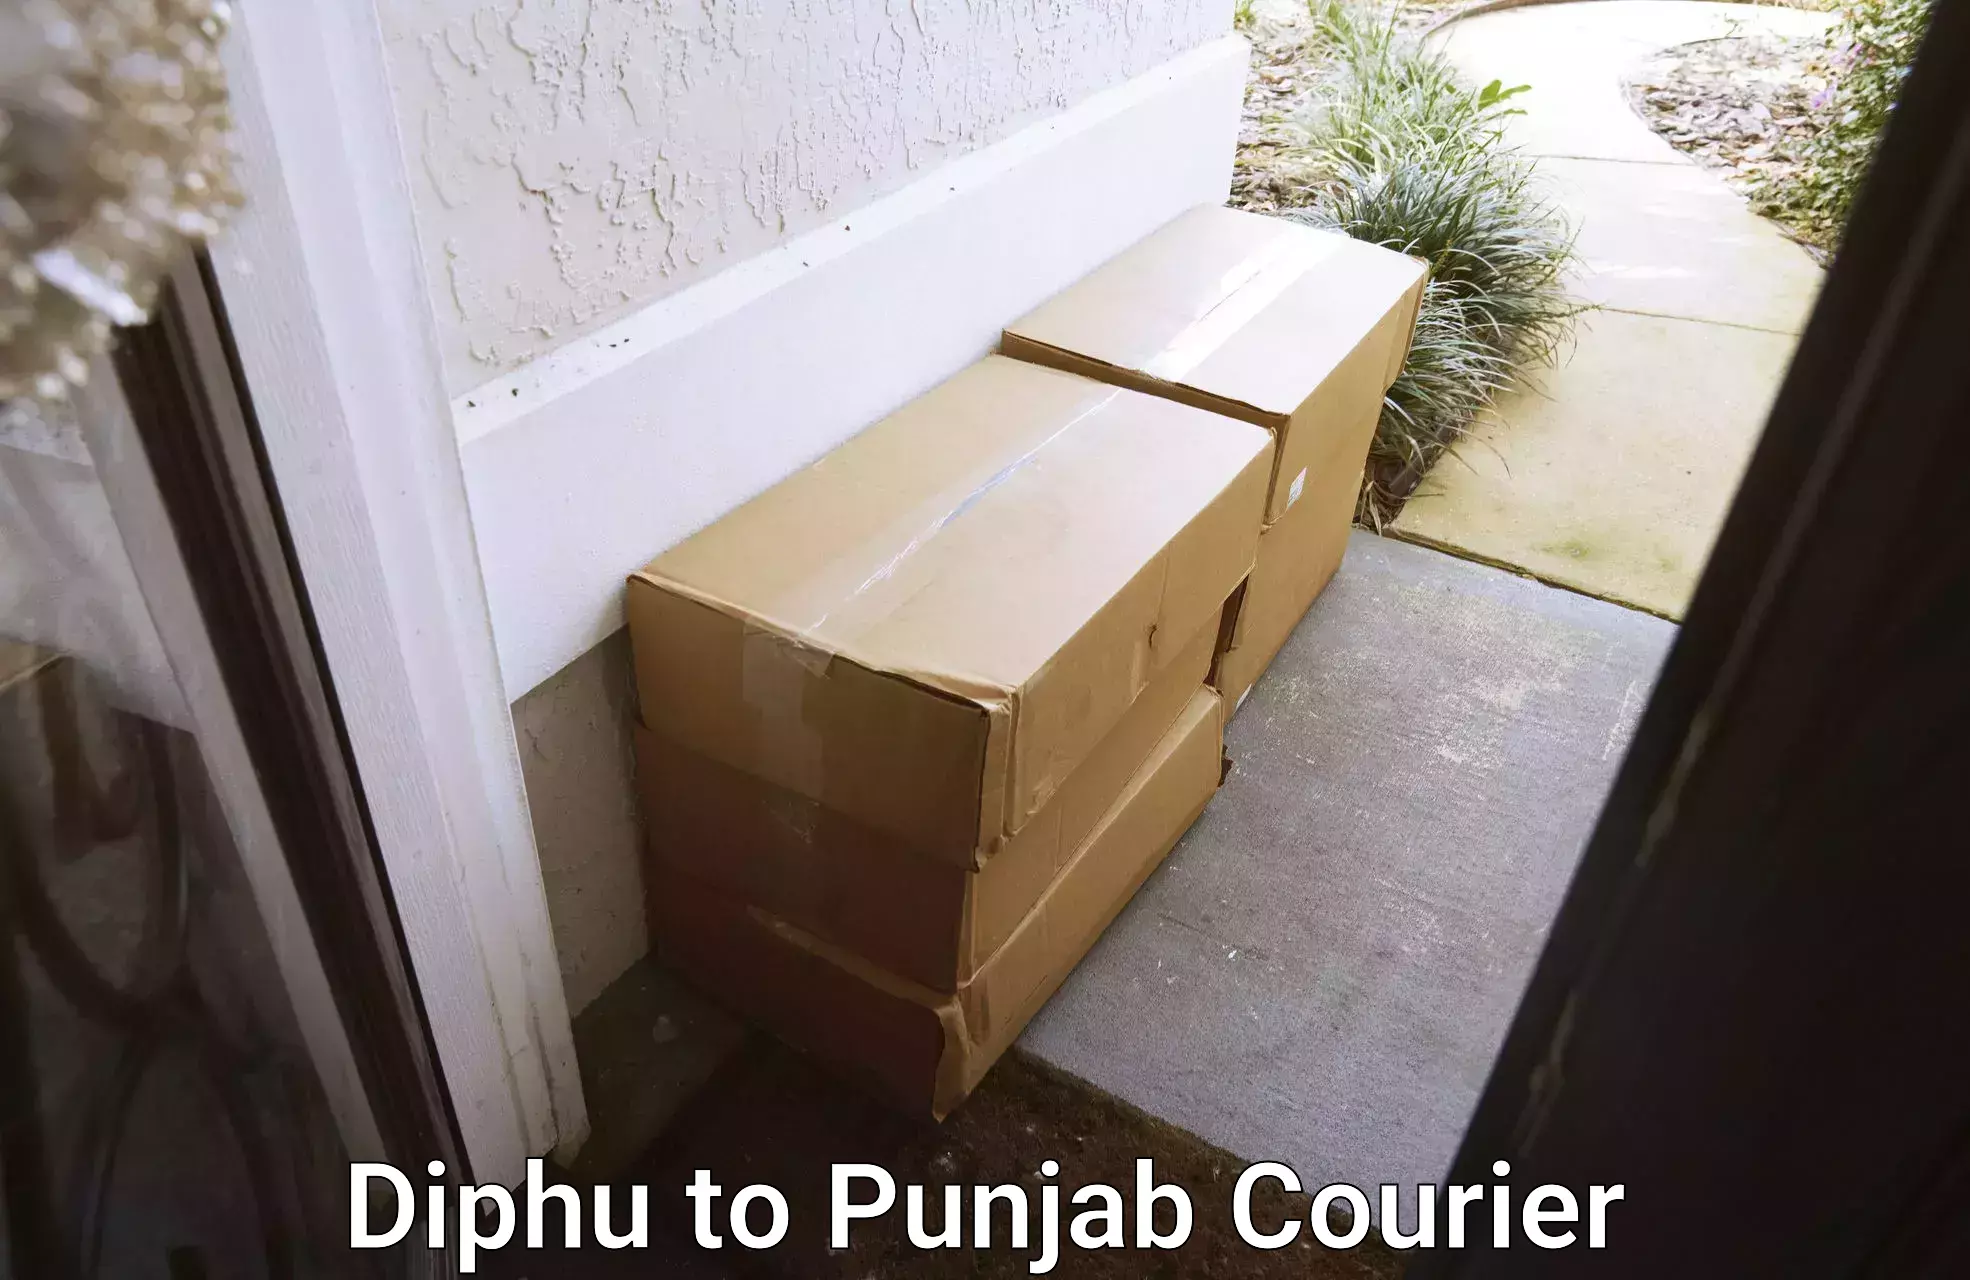 Nationwide shipping services Diphu to Faridkot